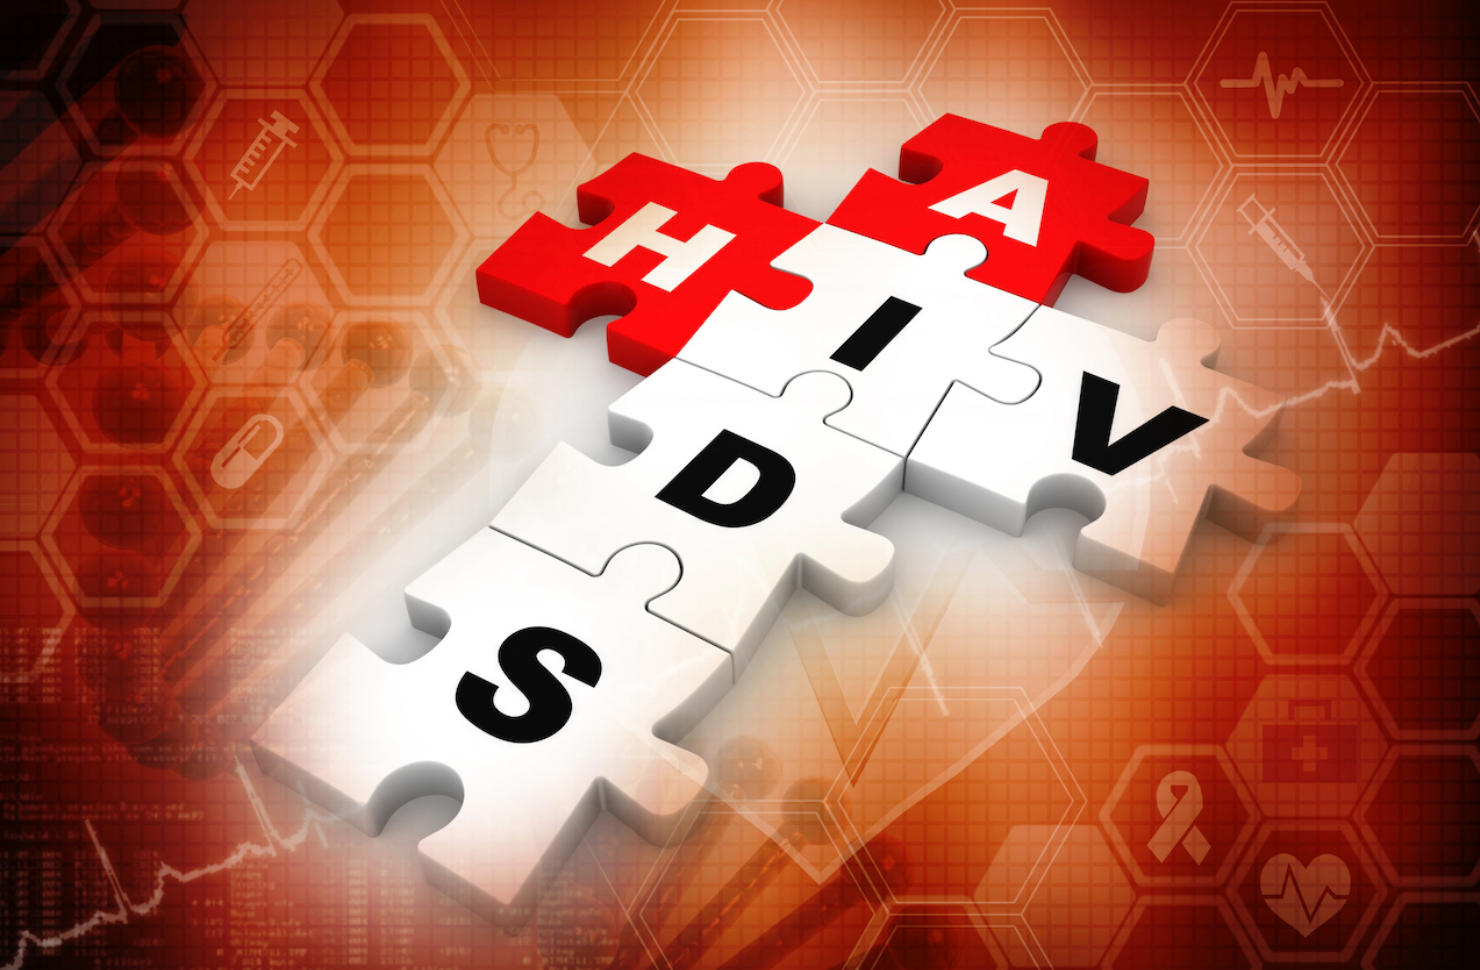 Clinical Insights into New Treatment Options for HIV: Cabenuva and Vocabria